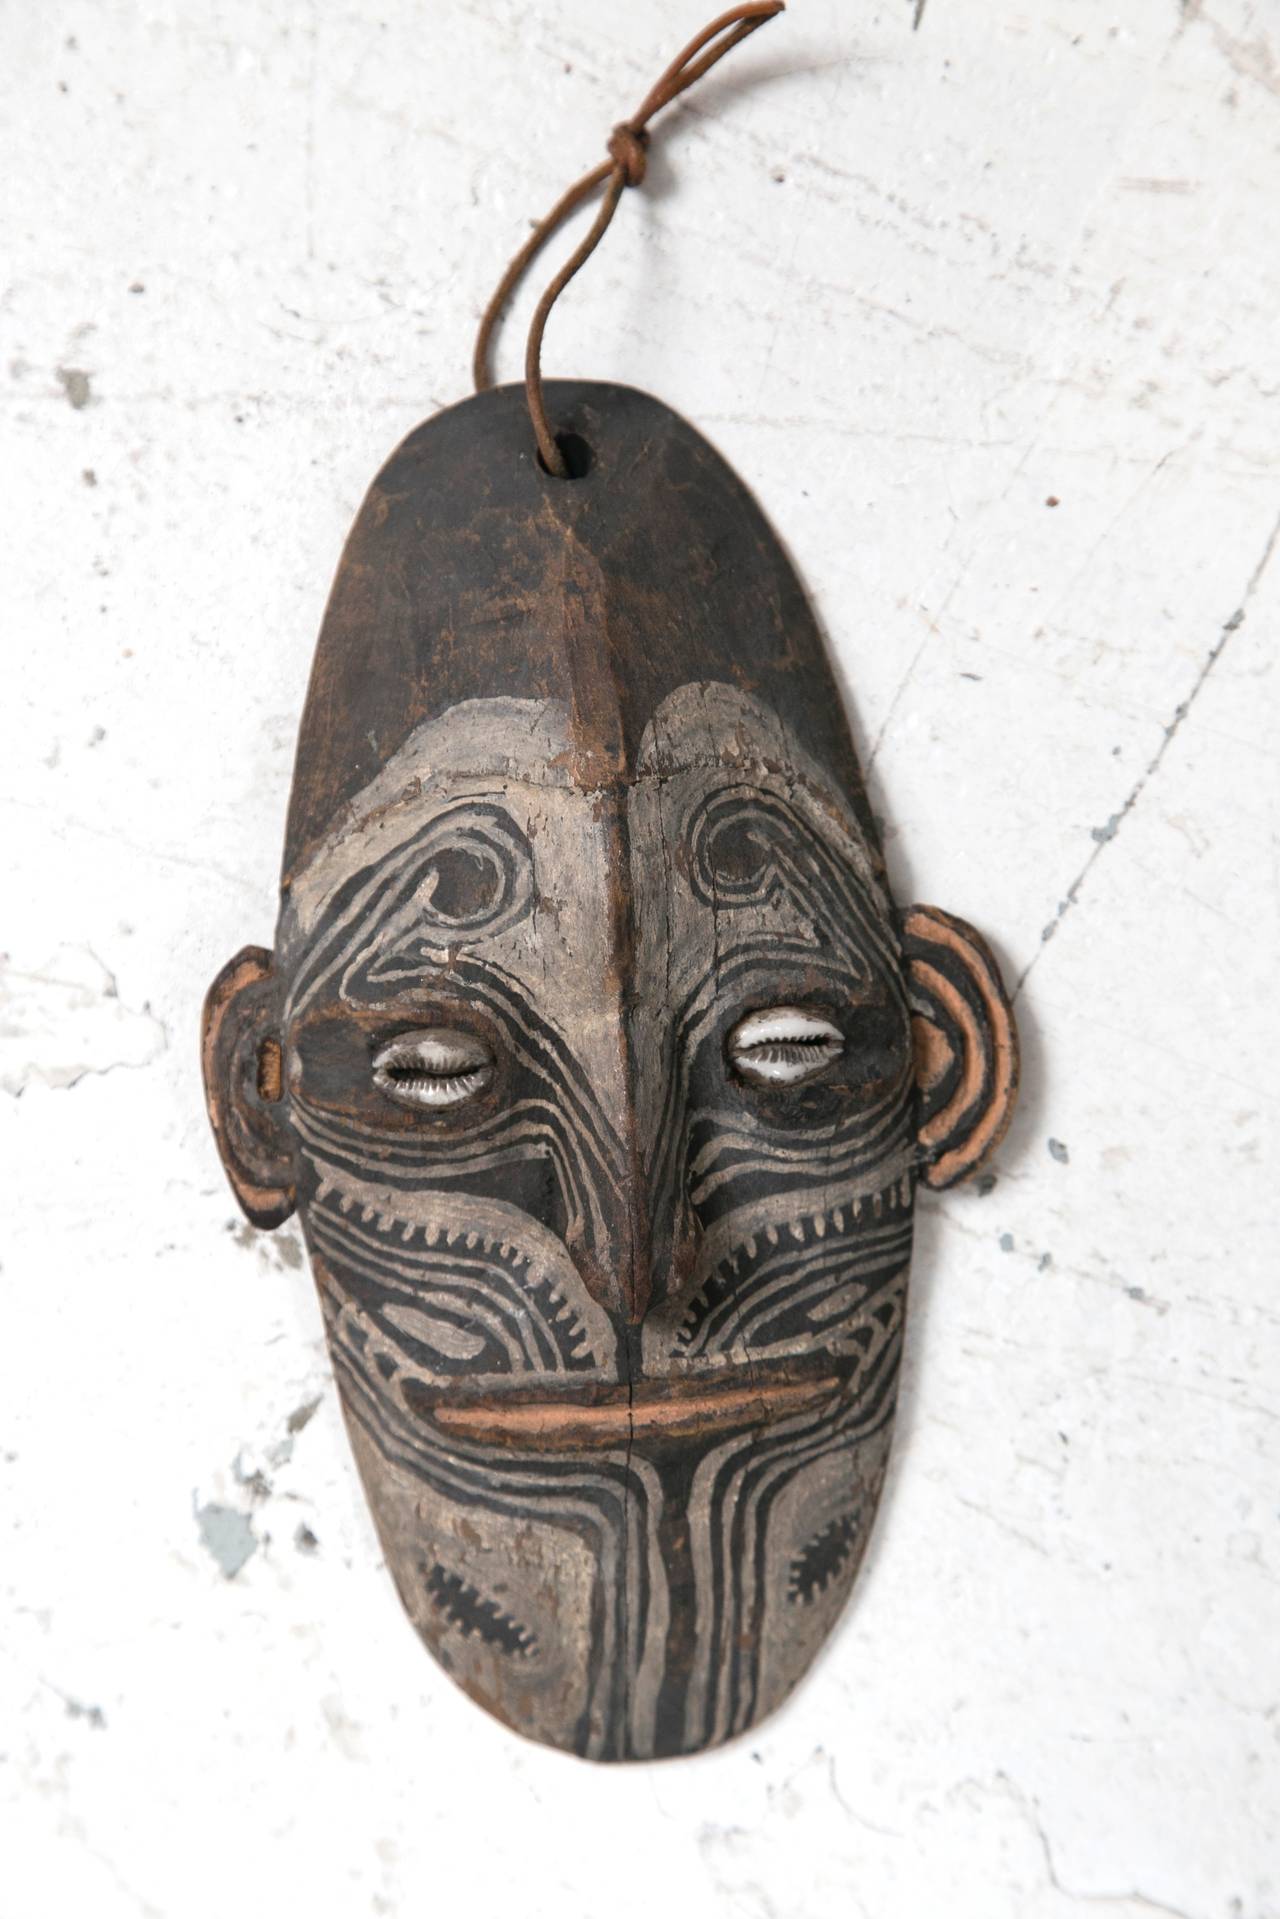 Carved and painted Talisman mask, Sepik River region in Papua New Guinea. Collected in the mid-1960s and in very good condition, with age appropriate wear. Cowrie shell eyes.